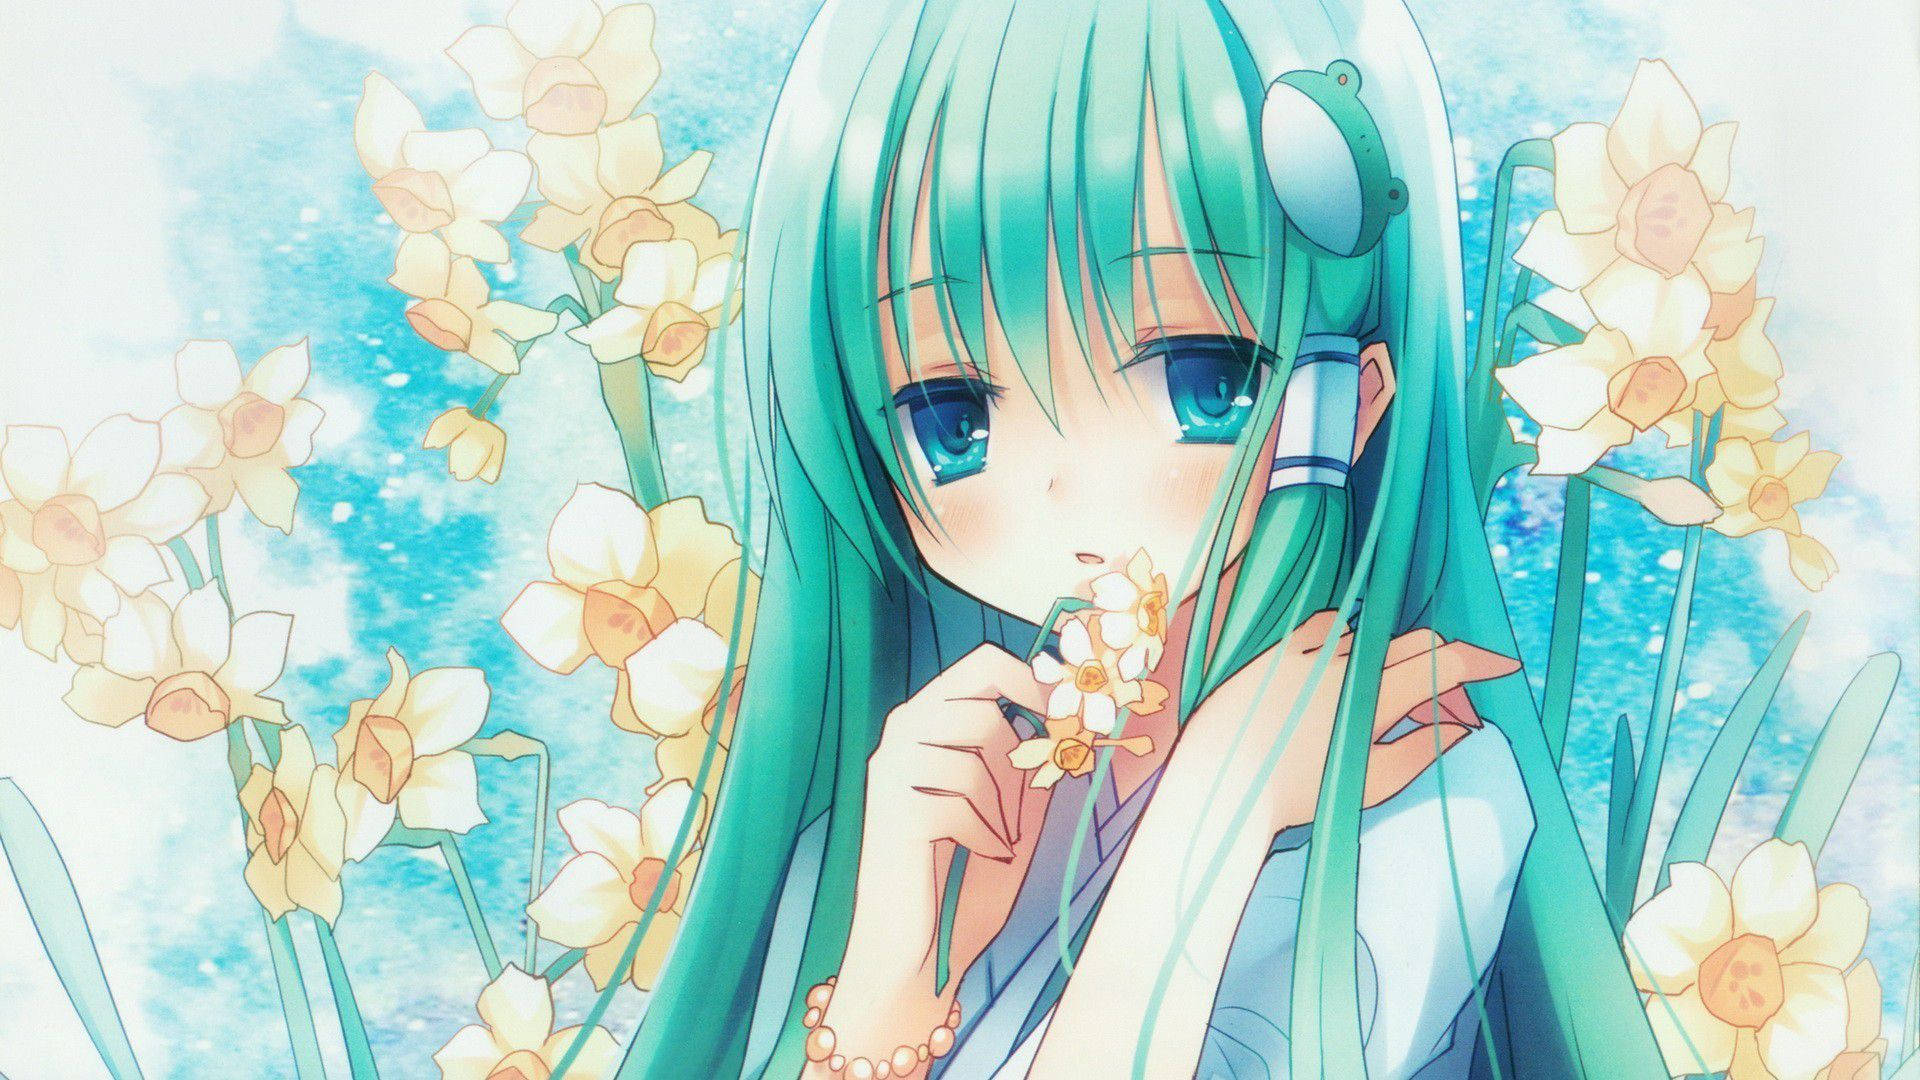 "A blue-haired girl looking up, ensconced in a cityscape" Wallpaper